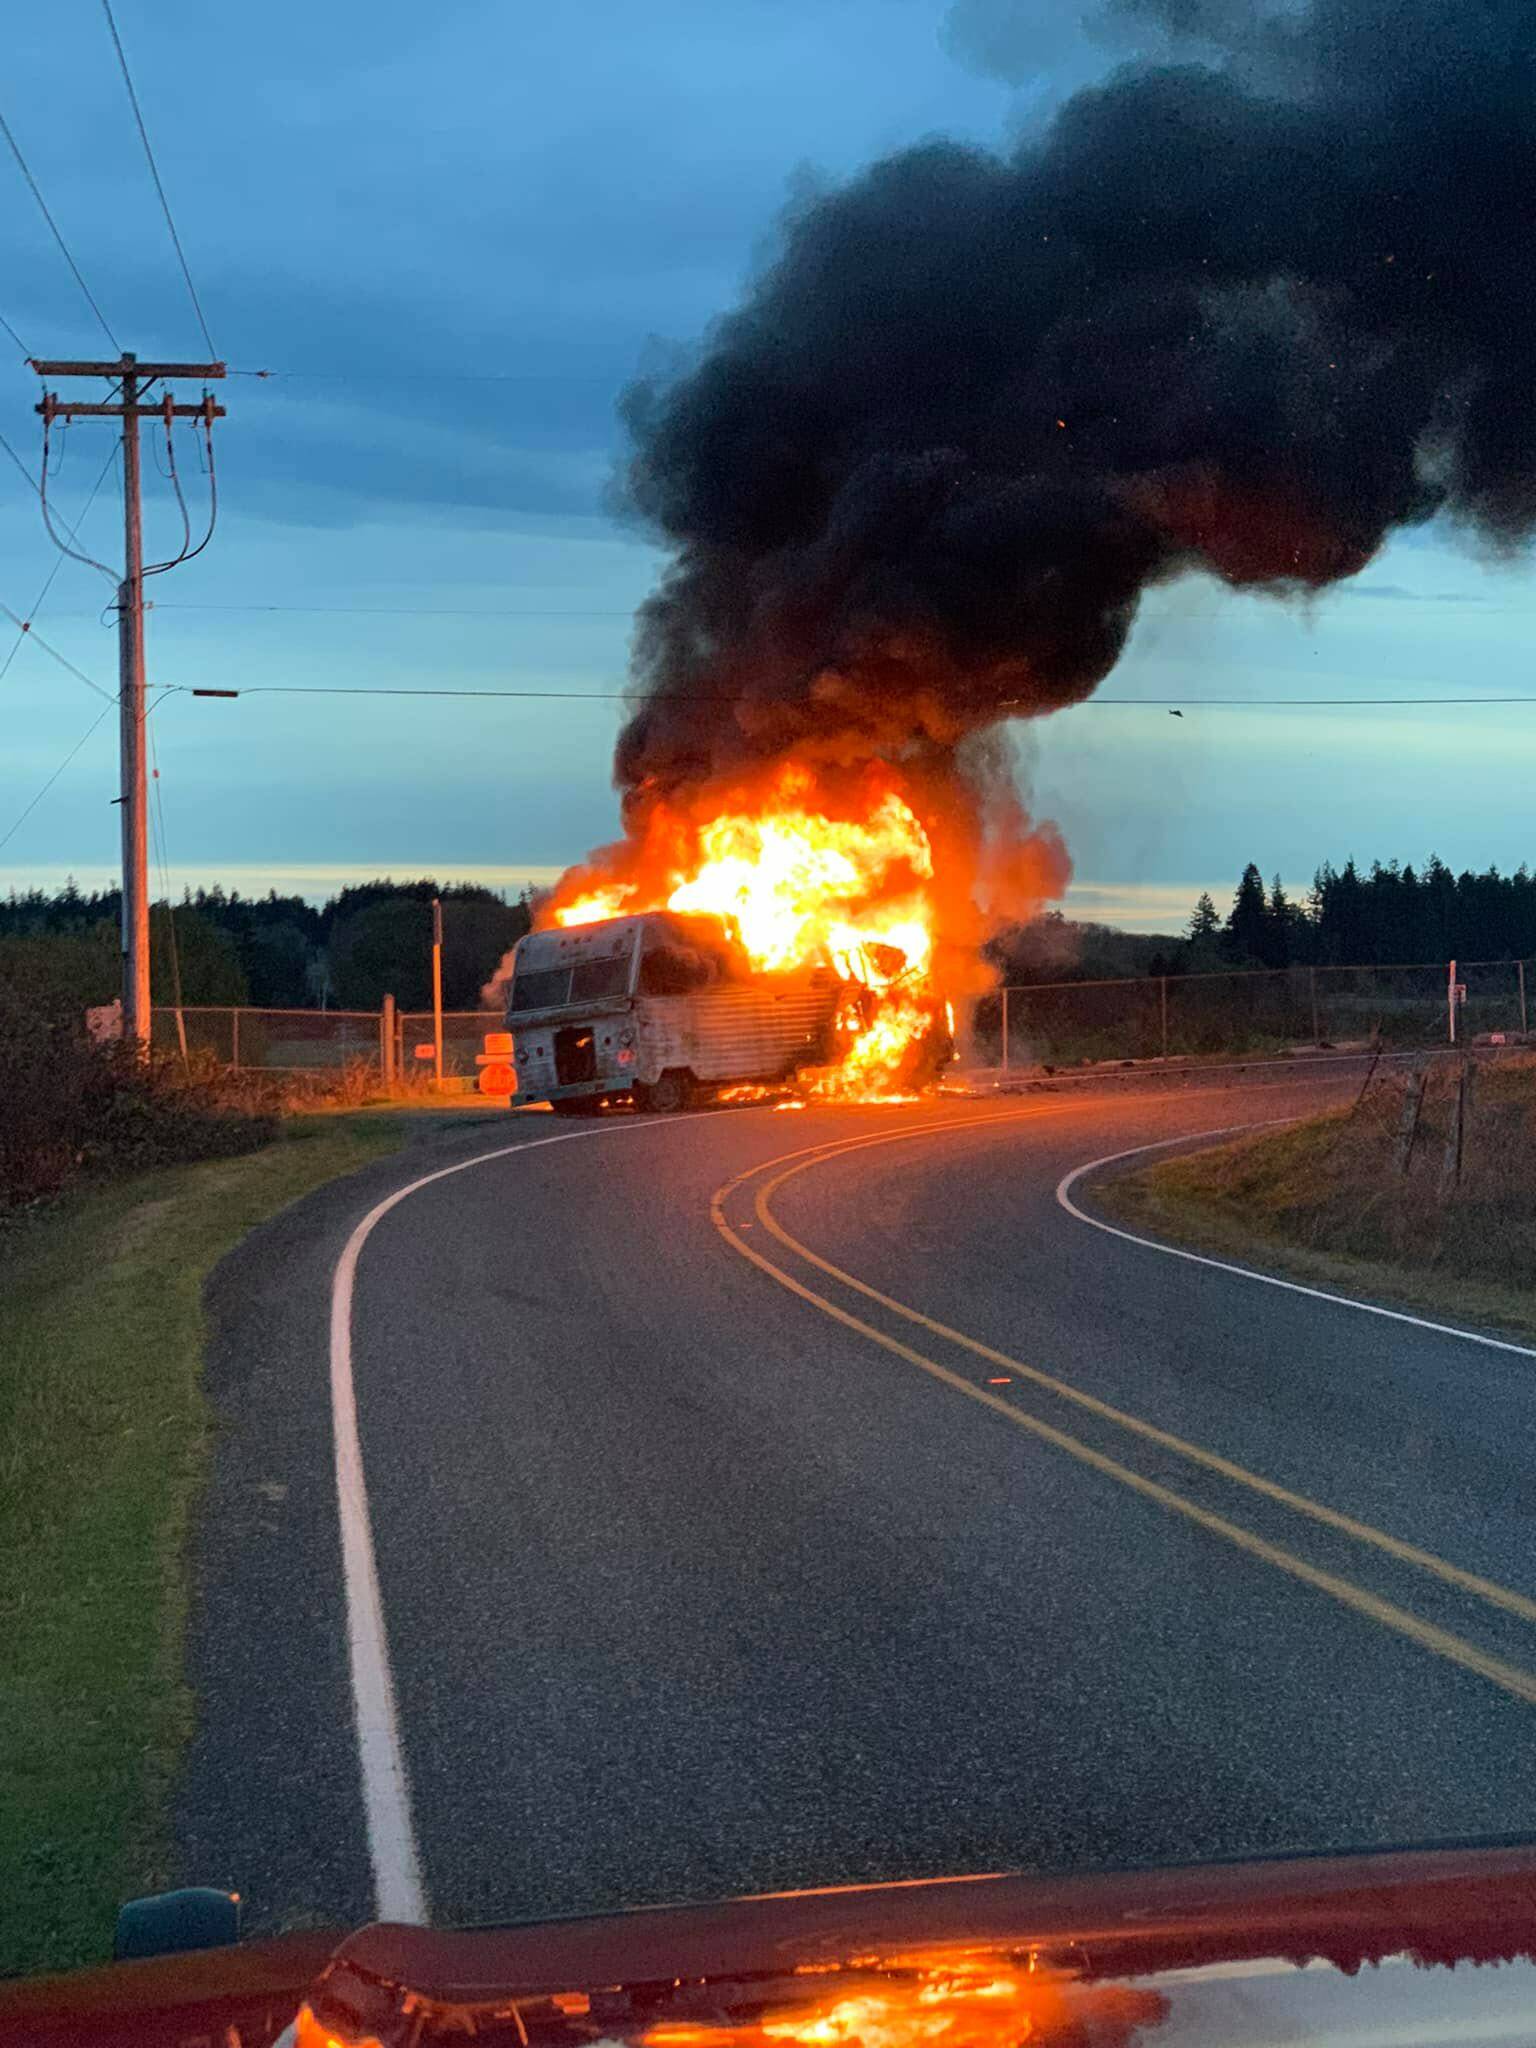 An RV caught fire Monday after being dragged along the road on its wheel rims, North Whidbey Fire and Rescue reports. (Photo provided)